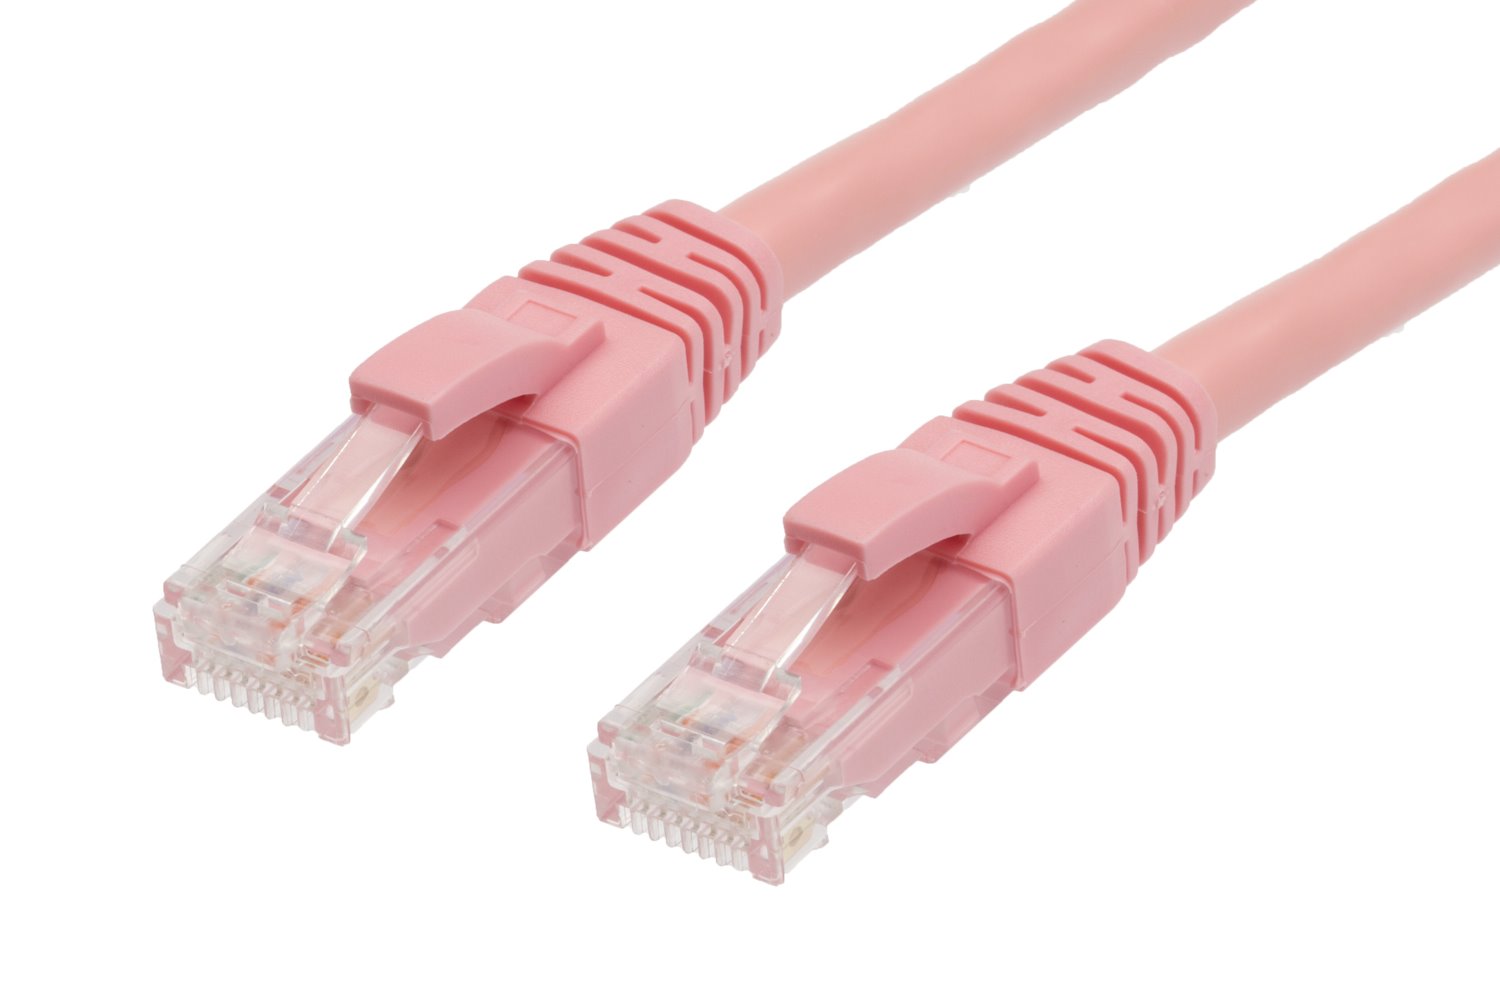 4Cabling 5M RJ45 Cat6 Ethernet Cable. Pink